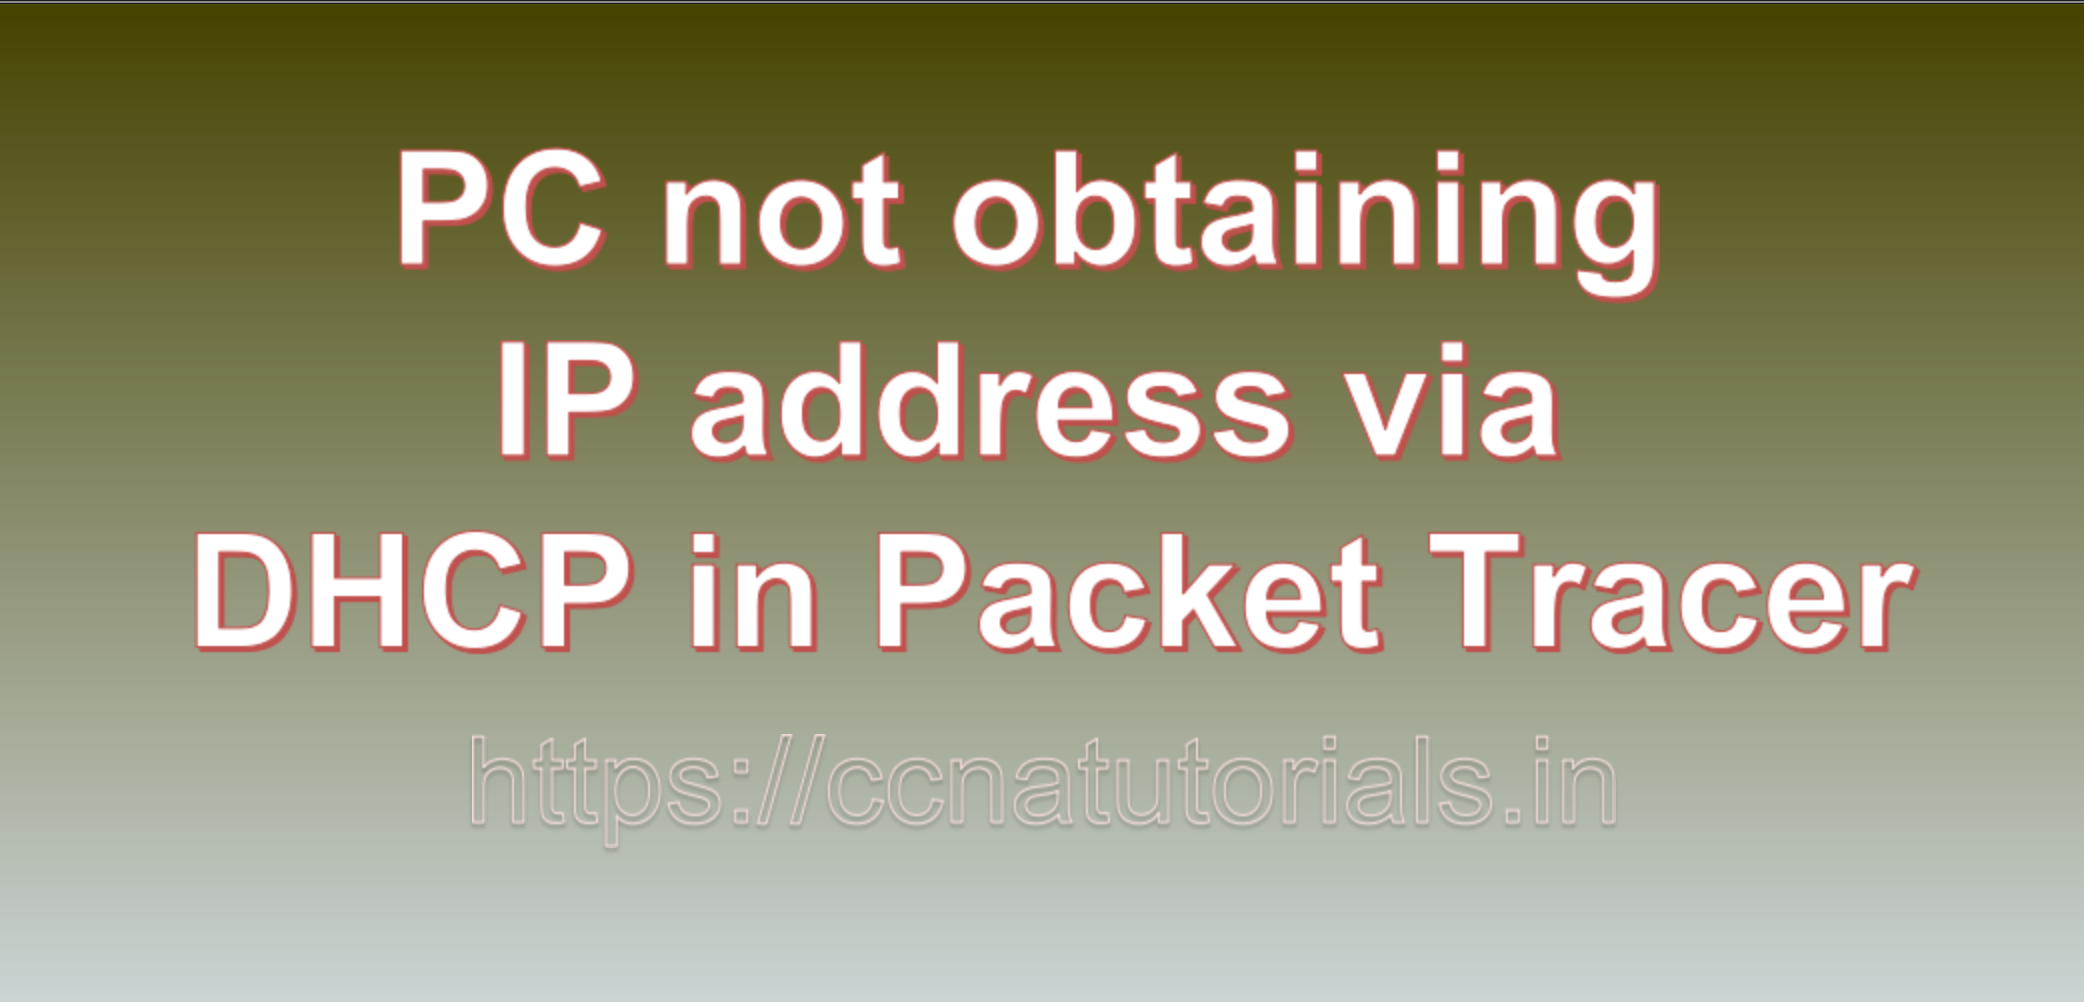 PC not obtaining IP address via DHCP in Packet Tracer, ccna, ccna tutorials